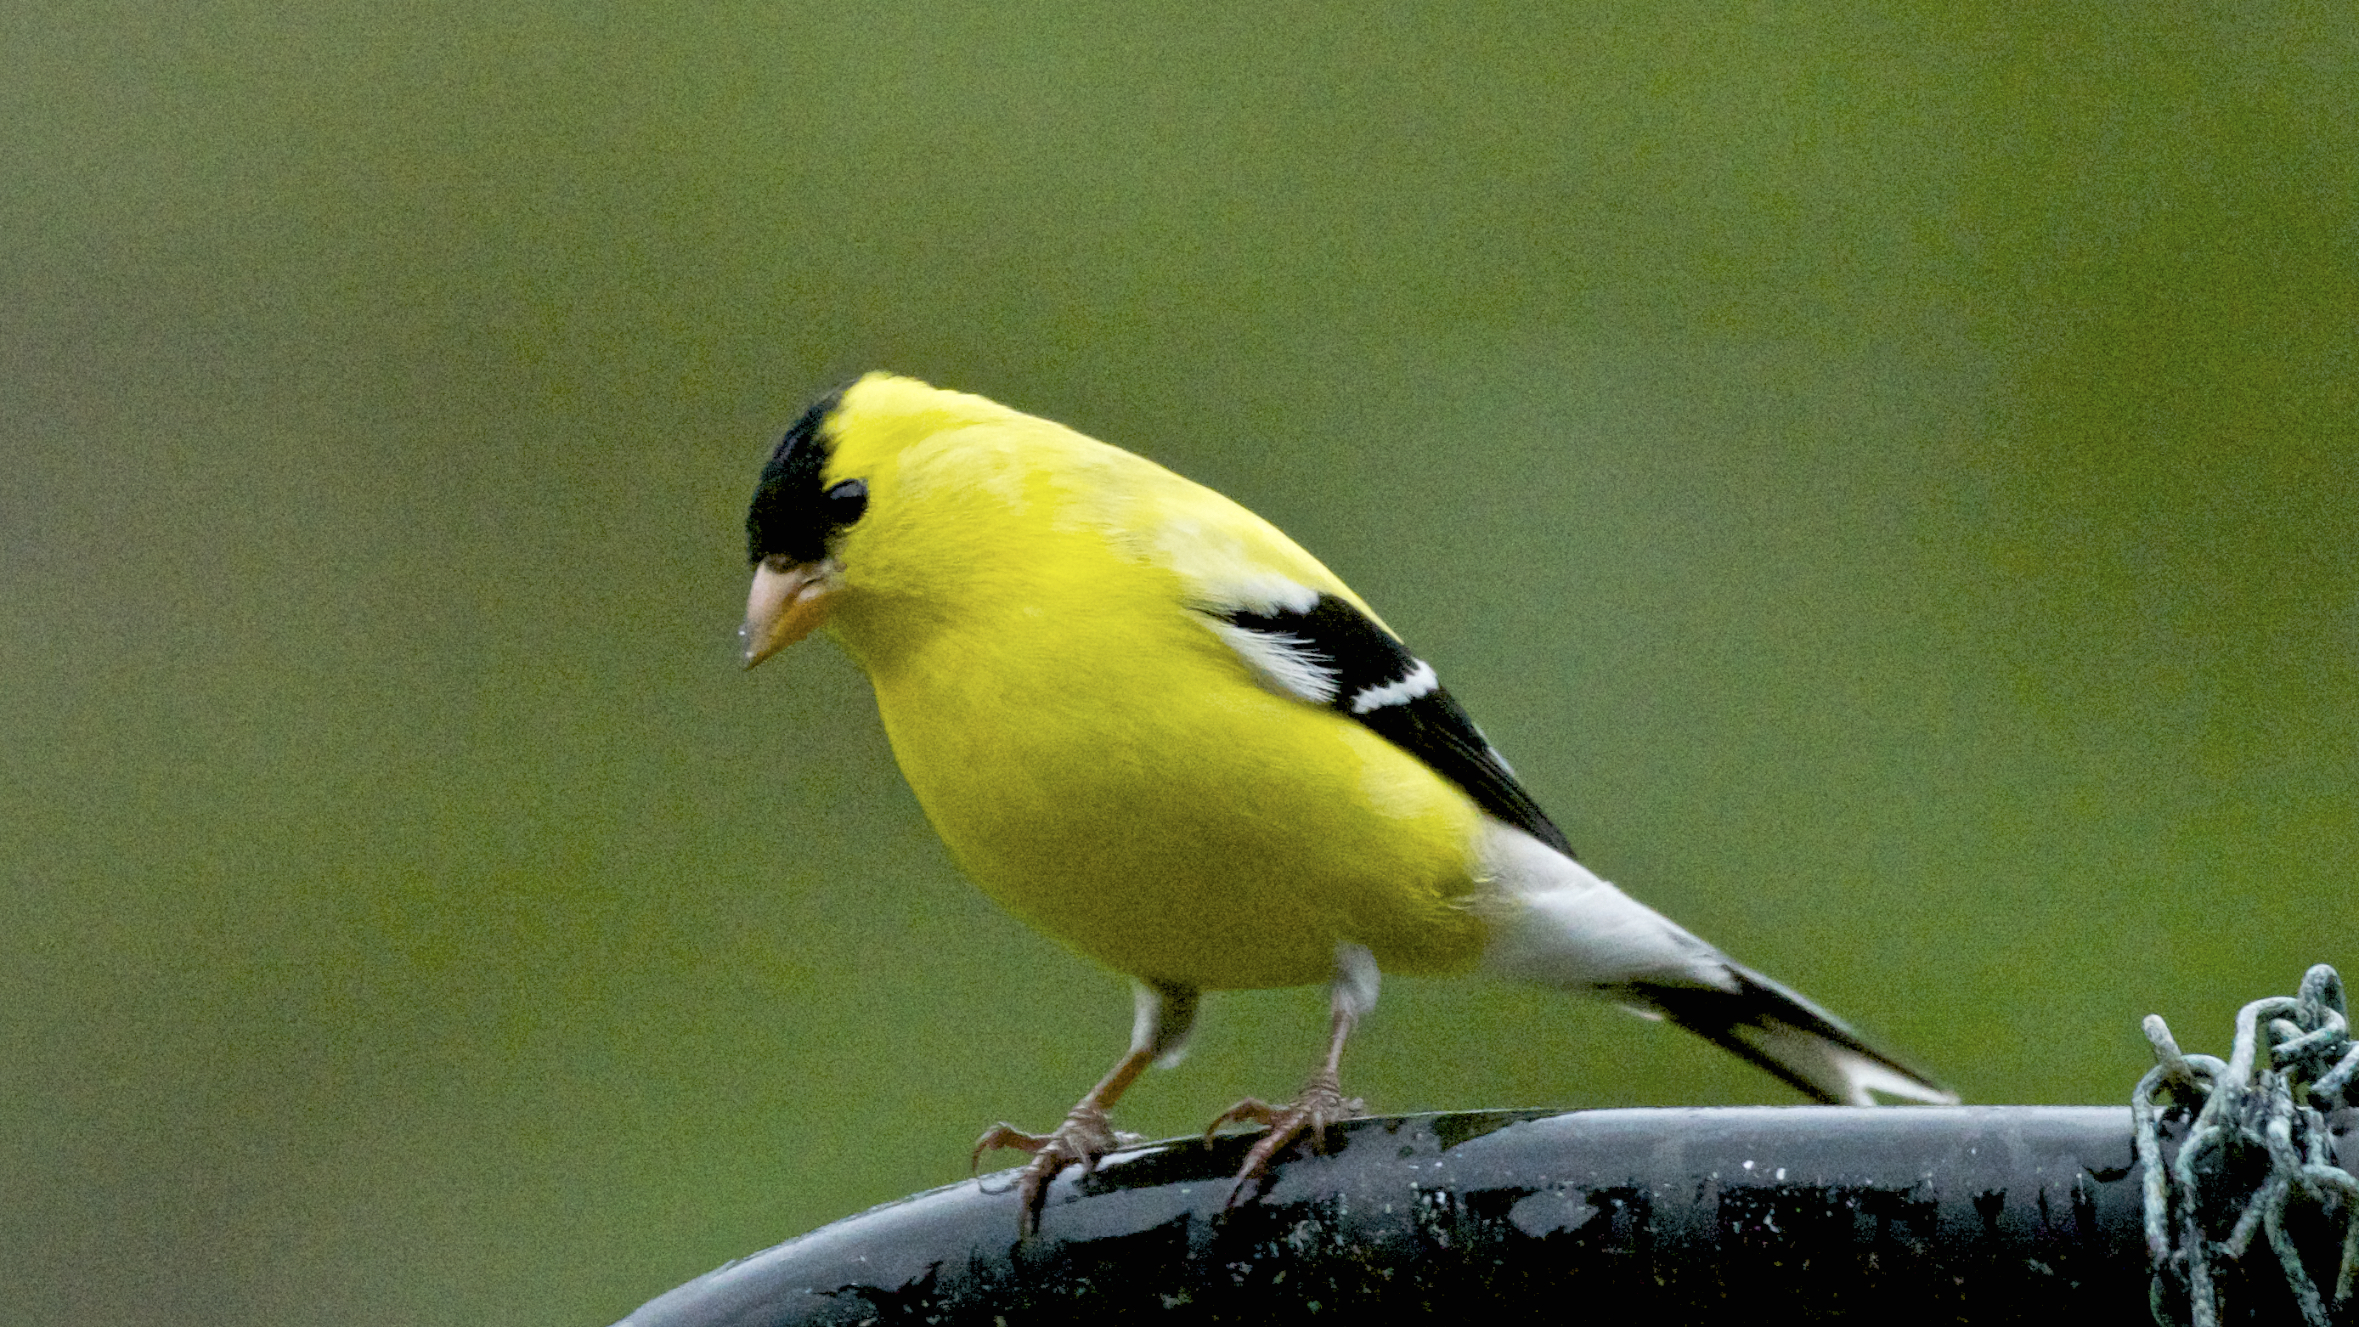 American Goldfinch after molting process. (Breeding plumage)